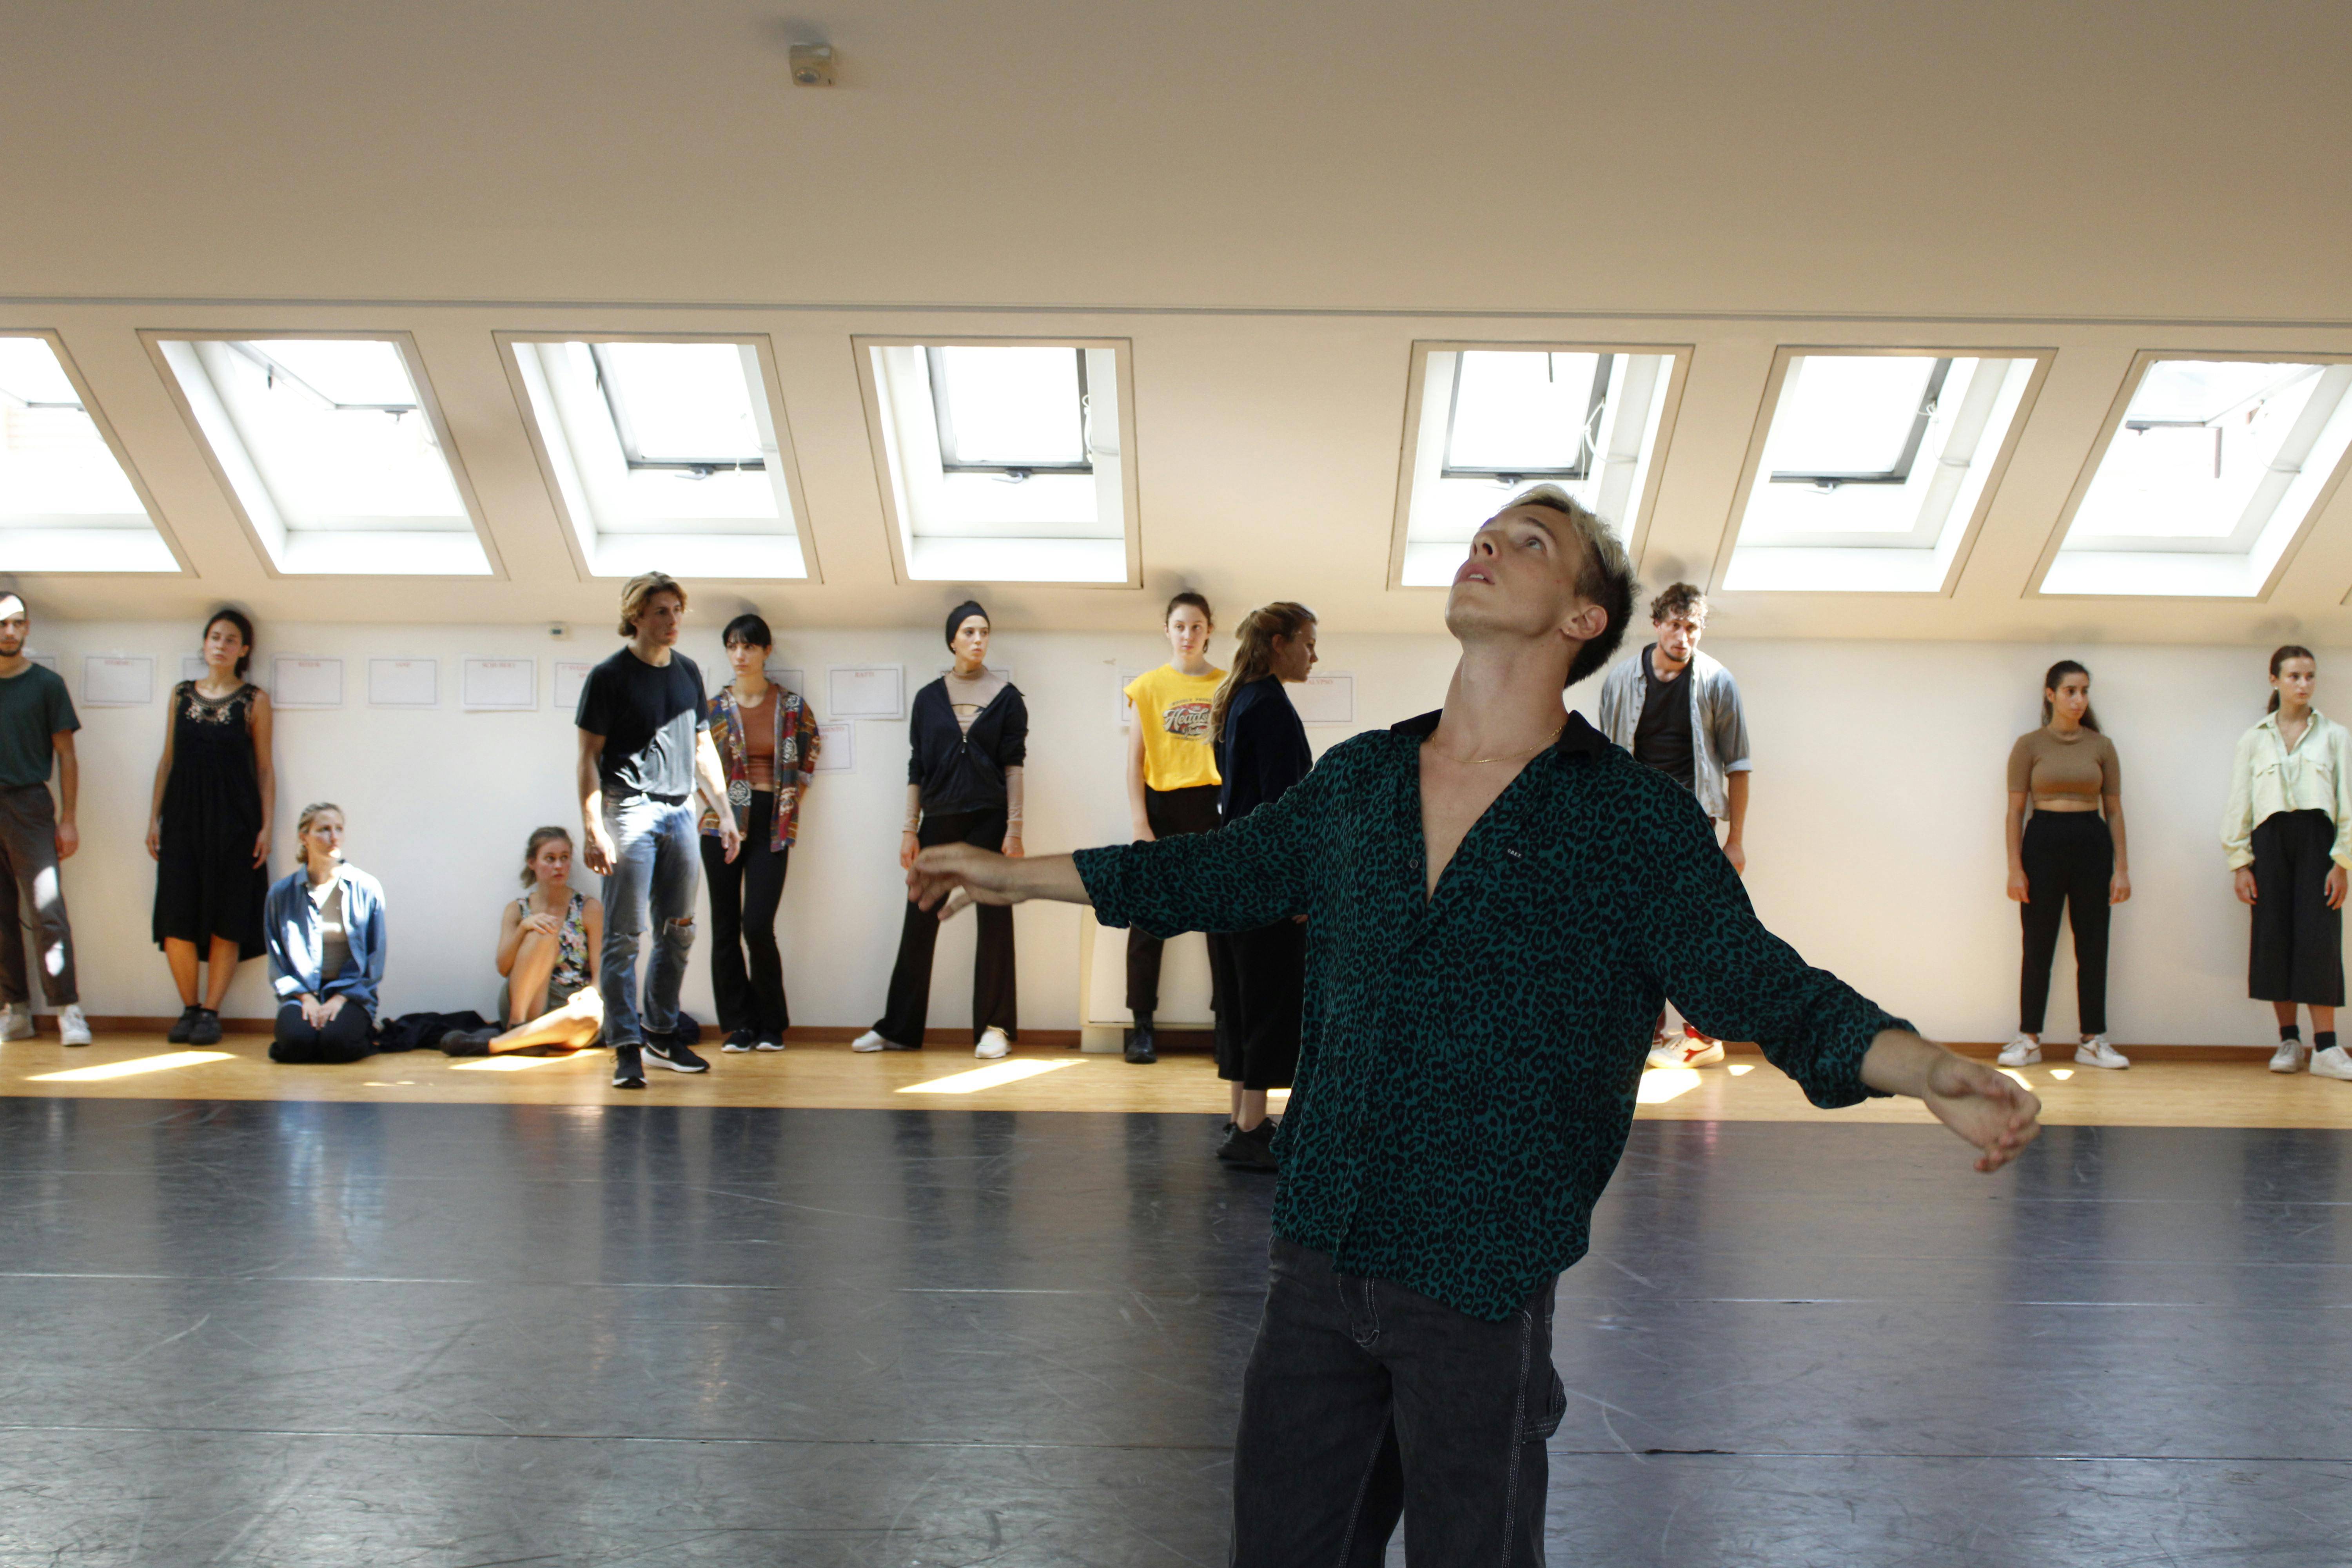 A dancer, standing in the center of the Studio, opens his arms gazing up. At the far end of the room a group of performers, leaning against the wall, observe.